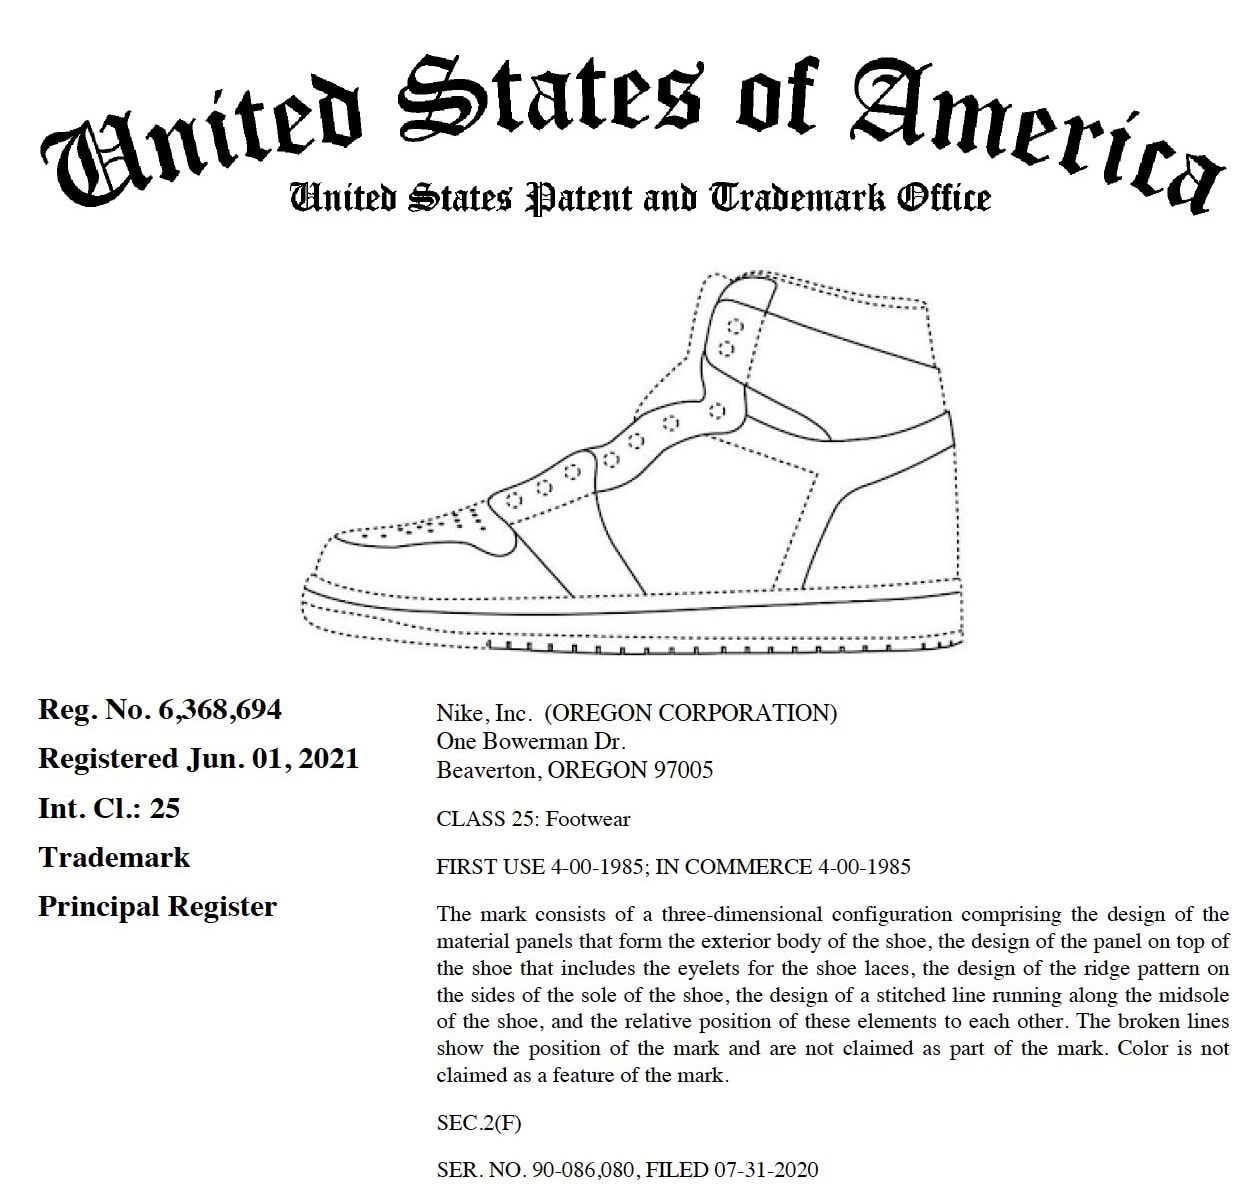 lavabo Descenso repentino Comunista The Air Jordan 1 Is Now a Federally Protected Trademark | Complex